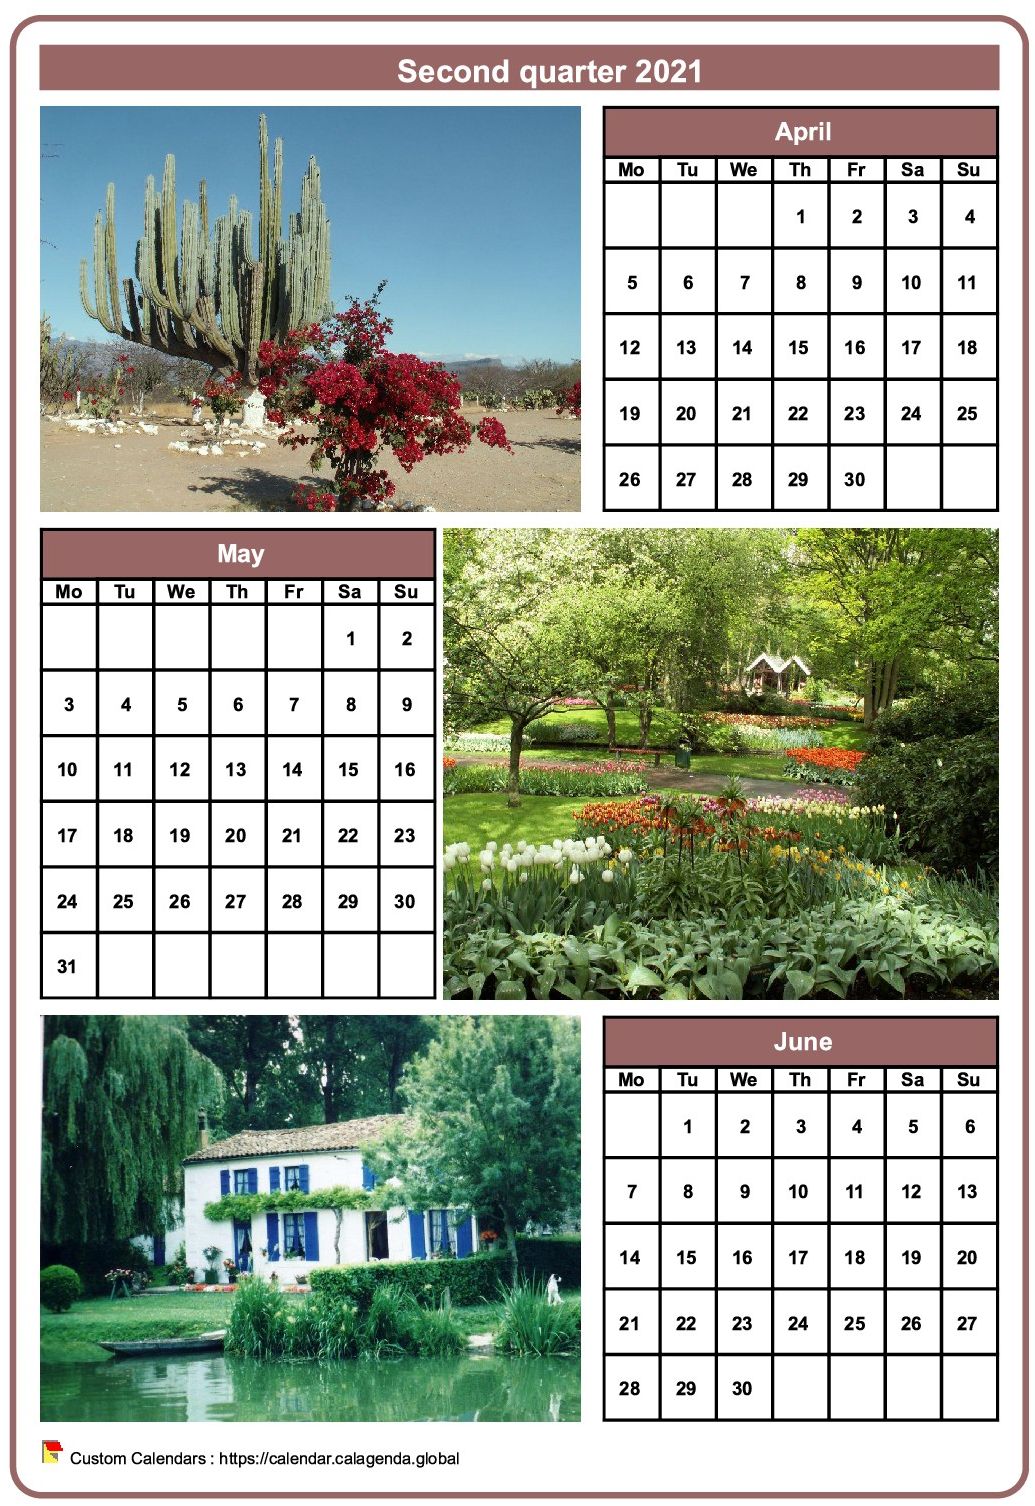 Calendar 2021 quarterly with a different photo every month